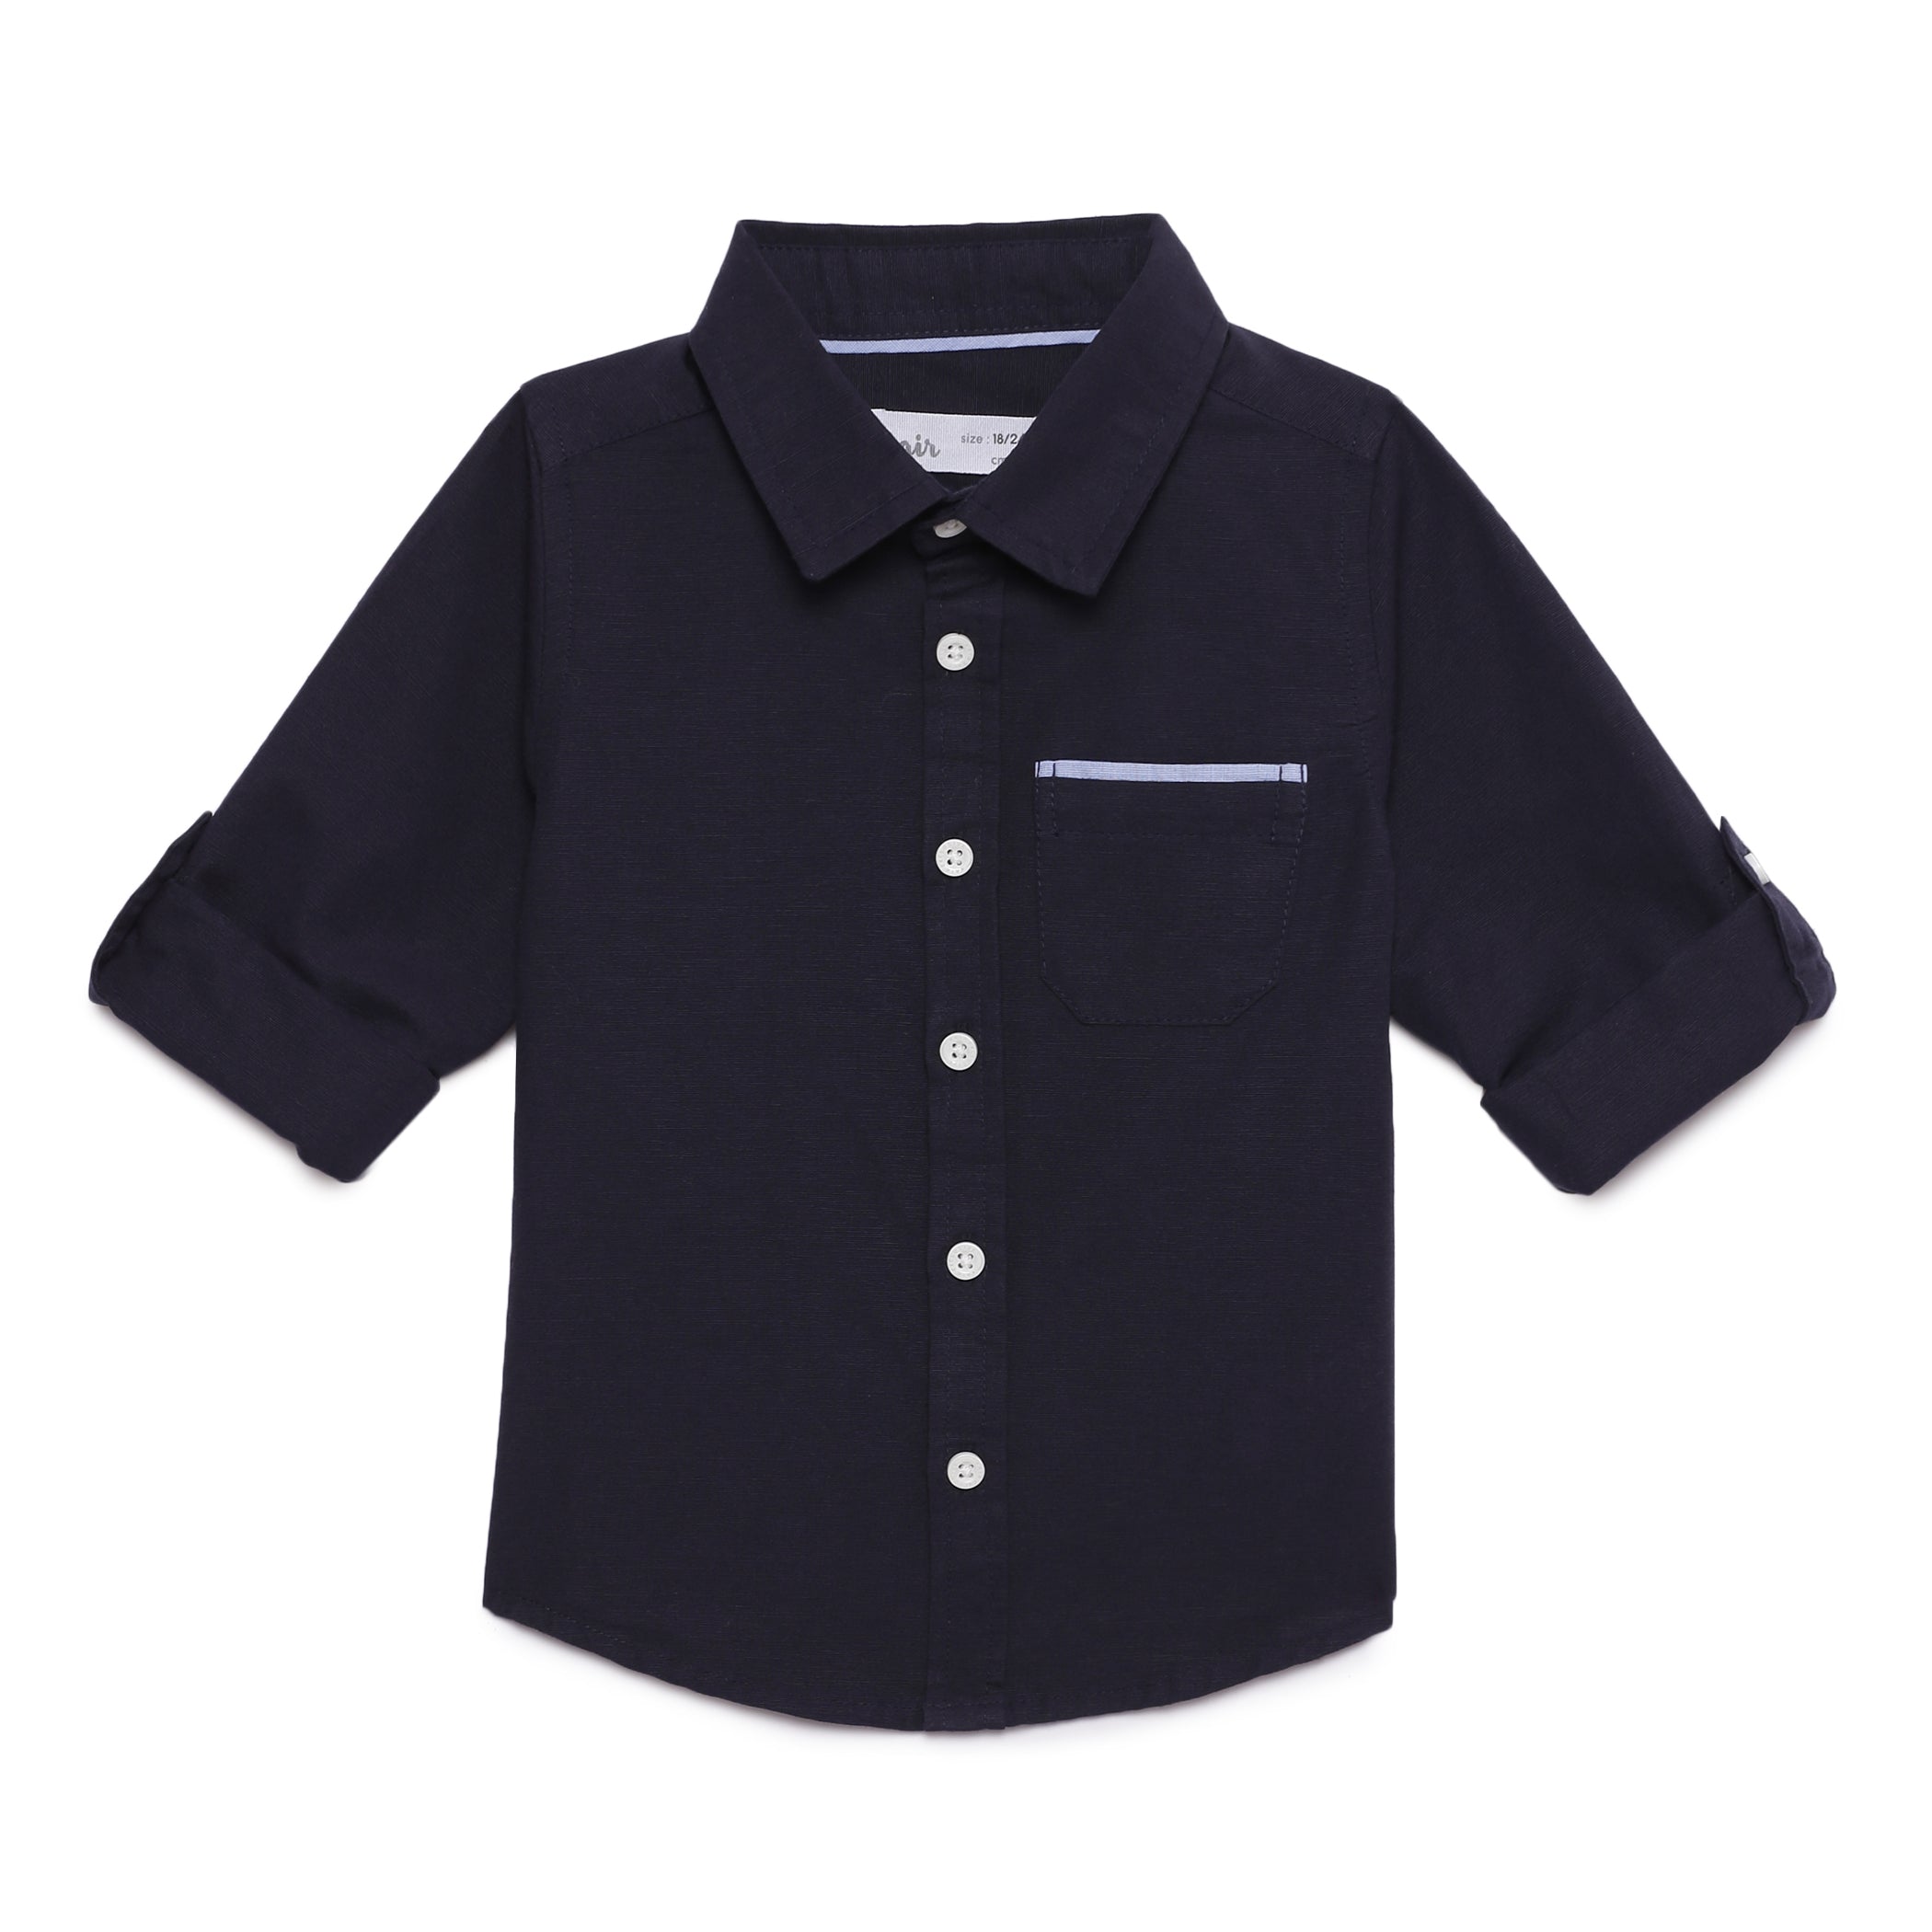 Baby Boys Roll Up Sleeve Solid Shirt